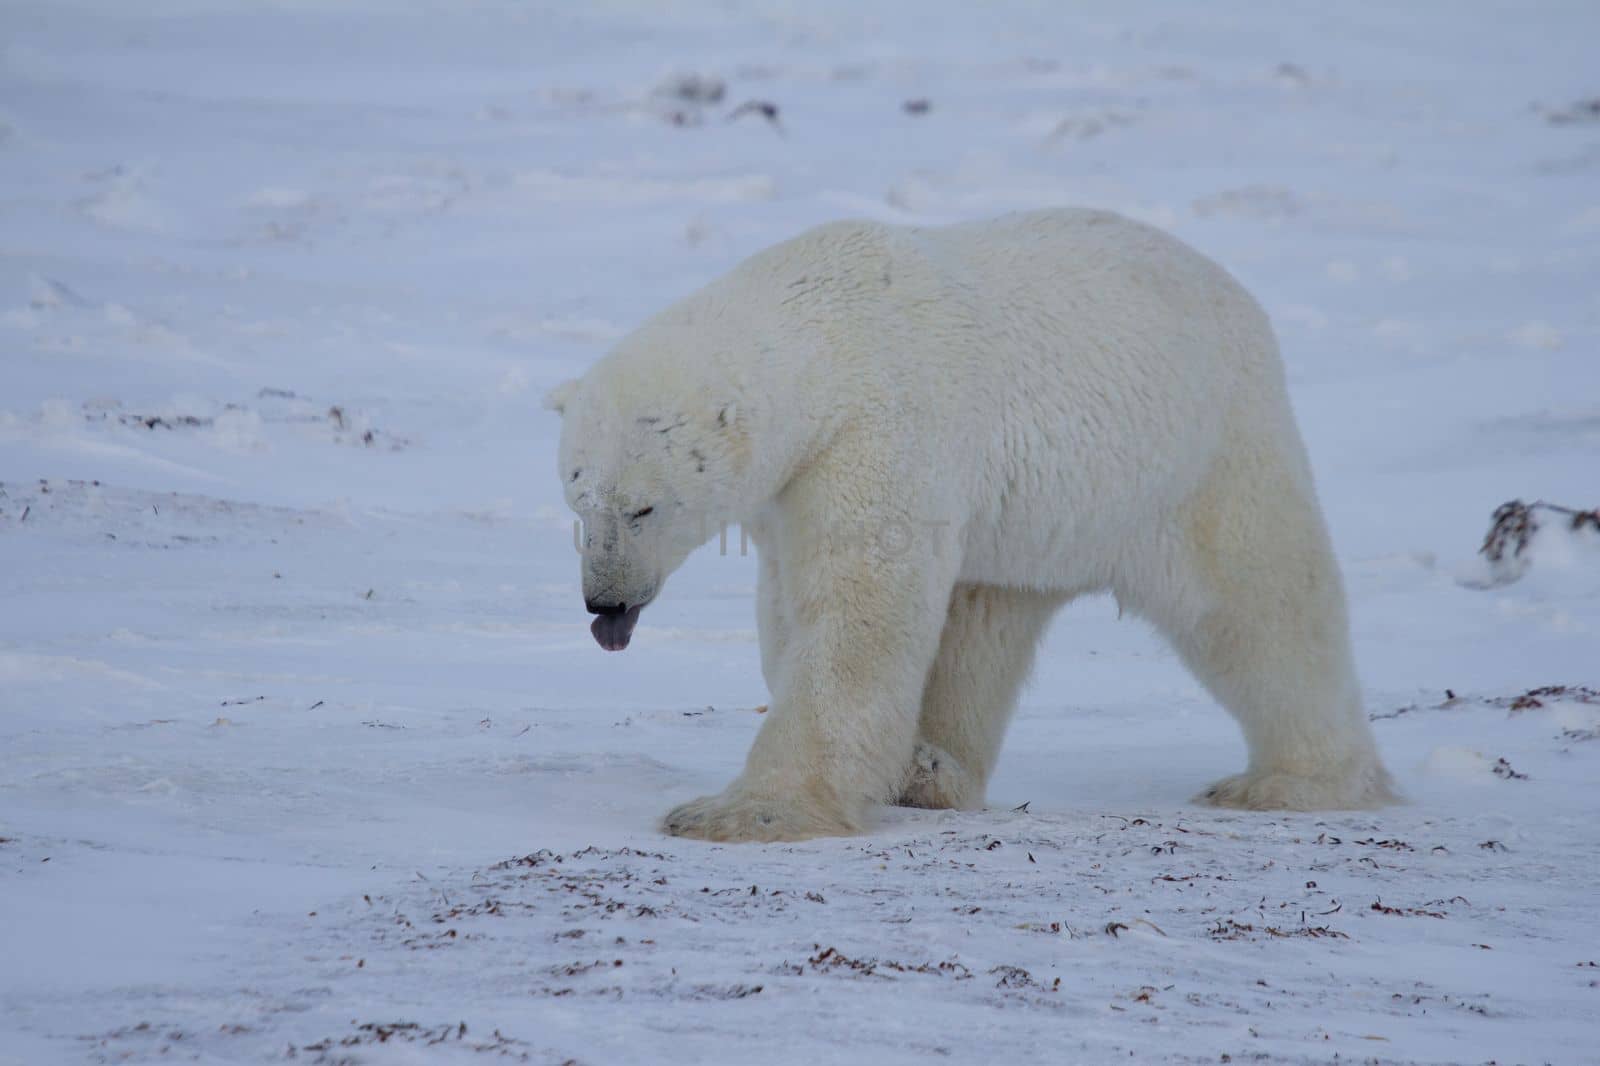 A polar bear, Ursus maritumis, sticking out its tongue while walking on snow among rocks by Granchinho